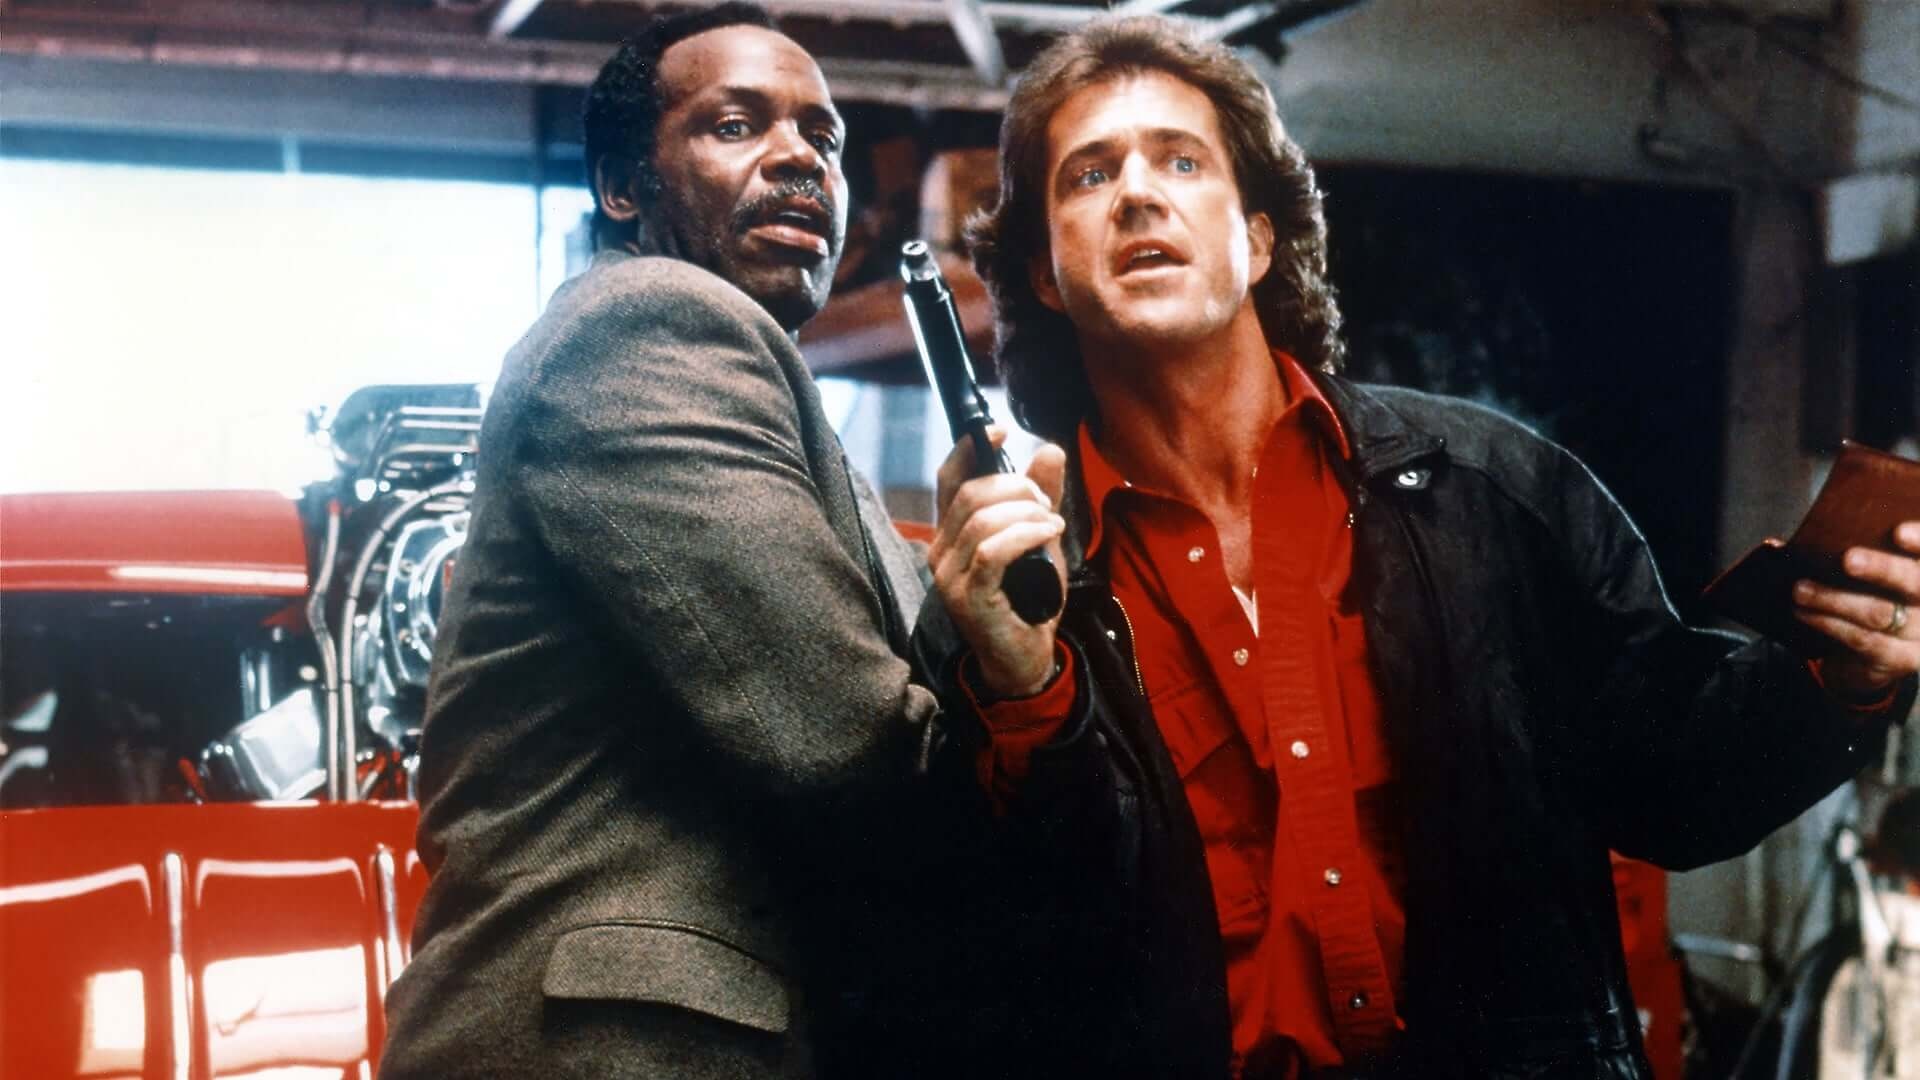 HD wallpaper, Copy, Movies, Crime Action, Lethal Weapon, 1920X1080 Full Hd Desktop, Desktop Full Hd Lethal Weapon 1987 Wallpaper Image